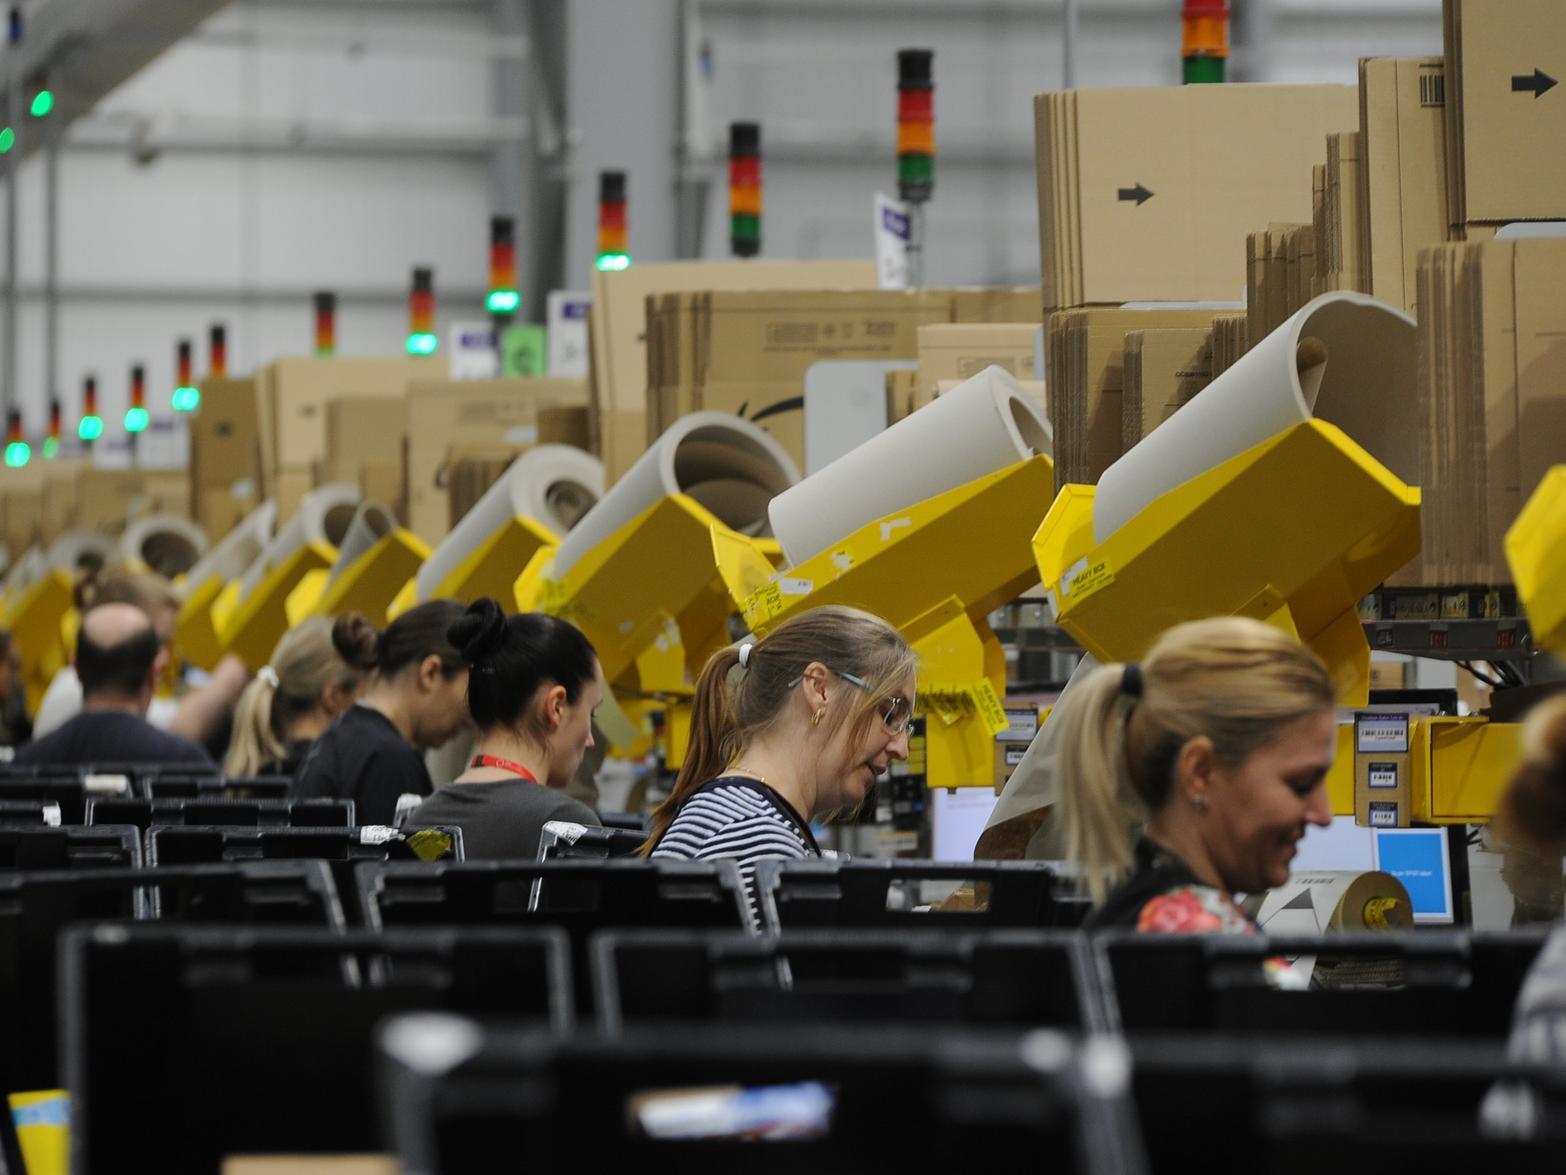 Amazon workers in Peterborough poised for Black Friday rush as shoppers